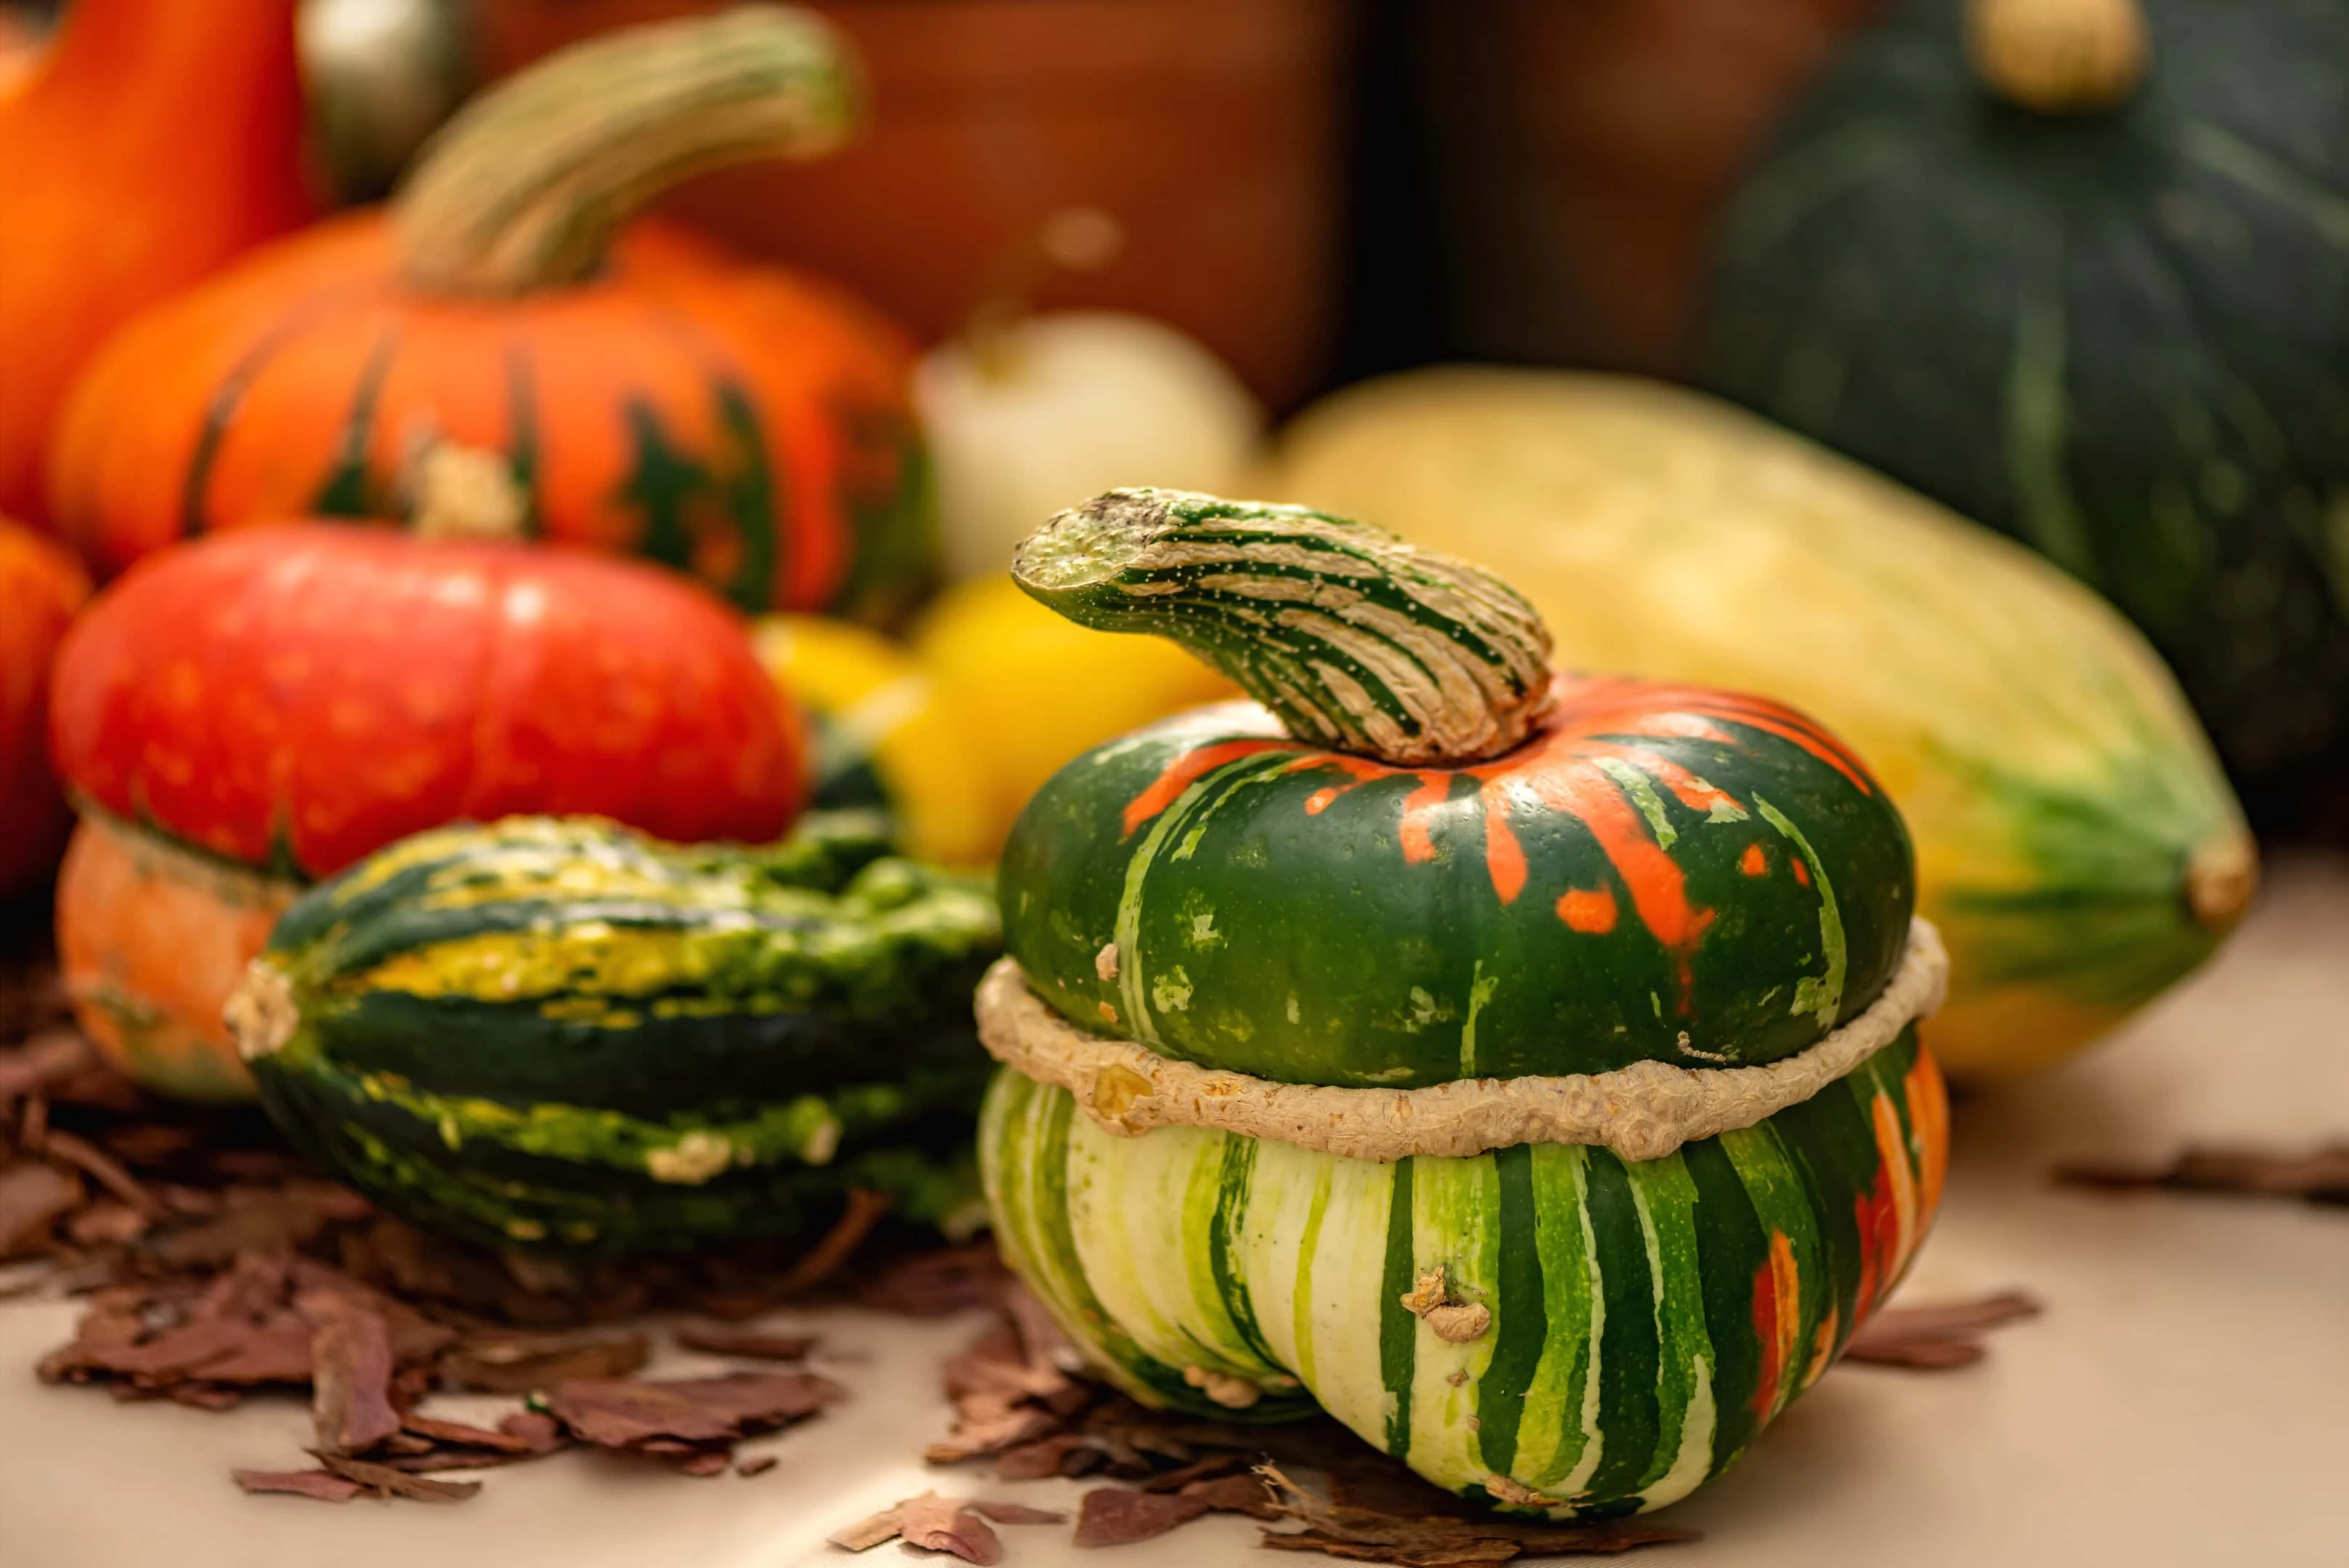 Squash is on our list of foods that strengthen cervix